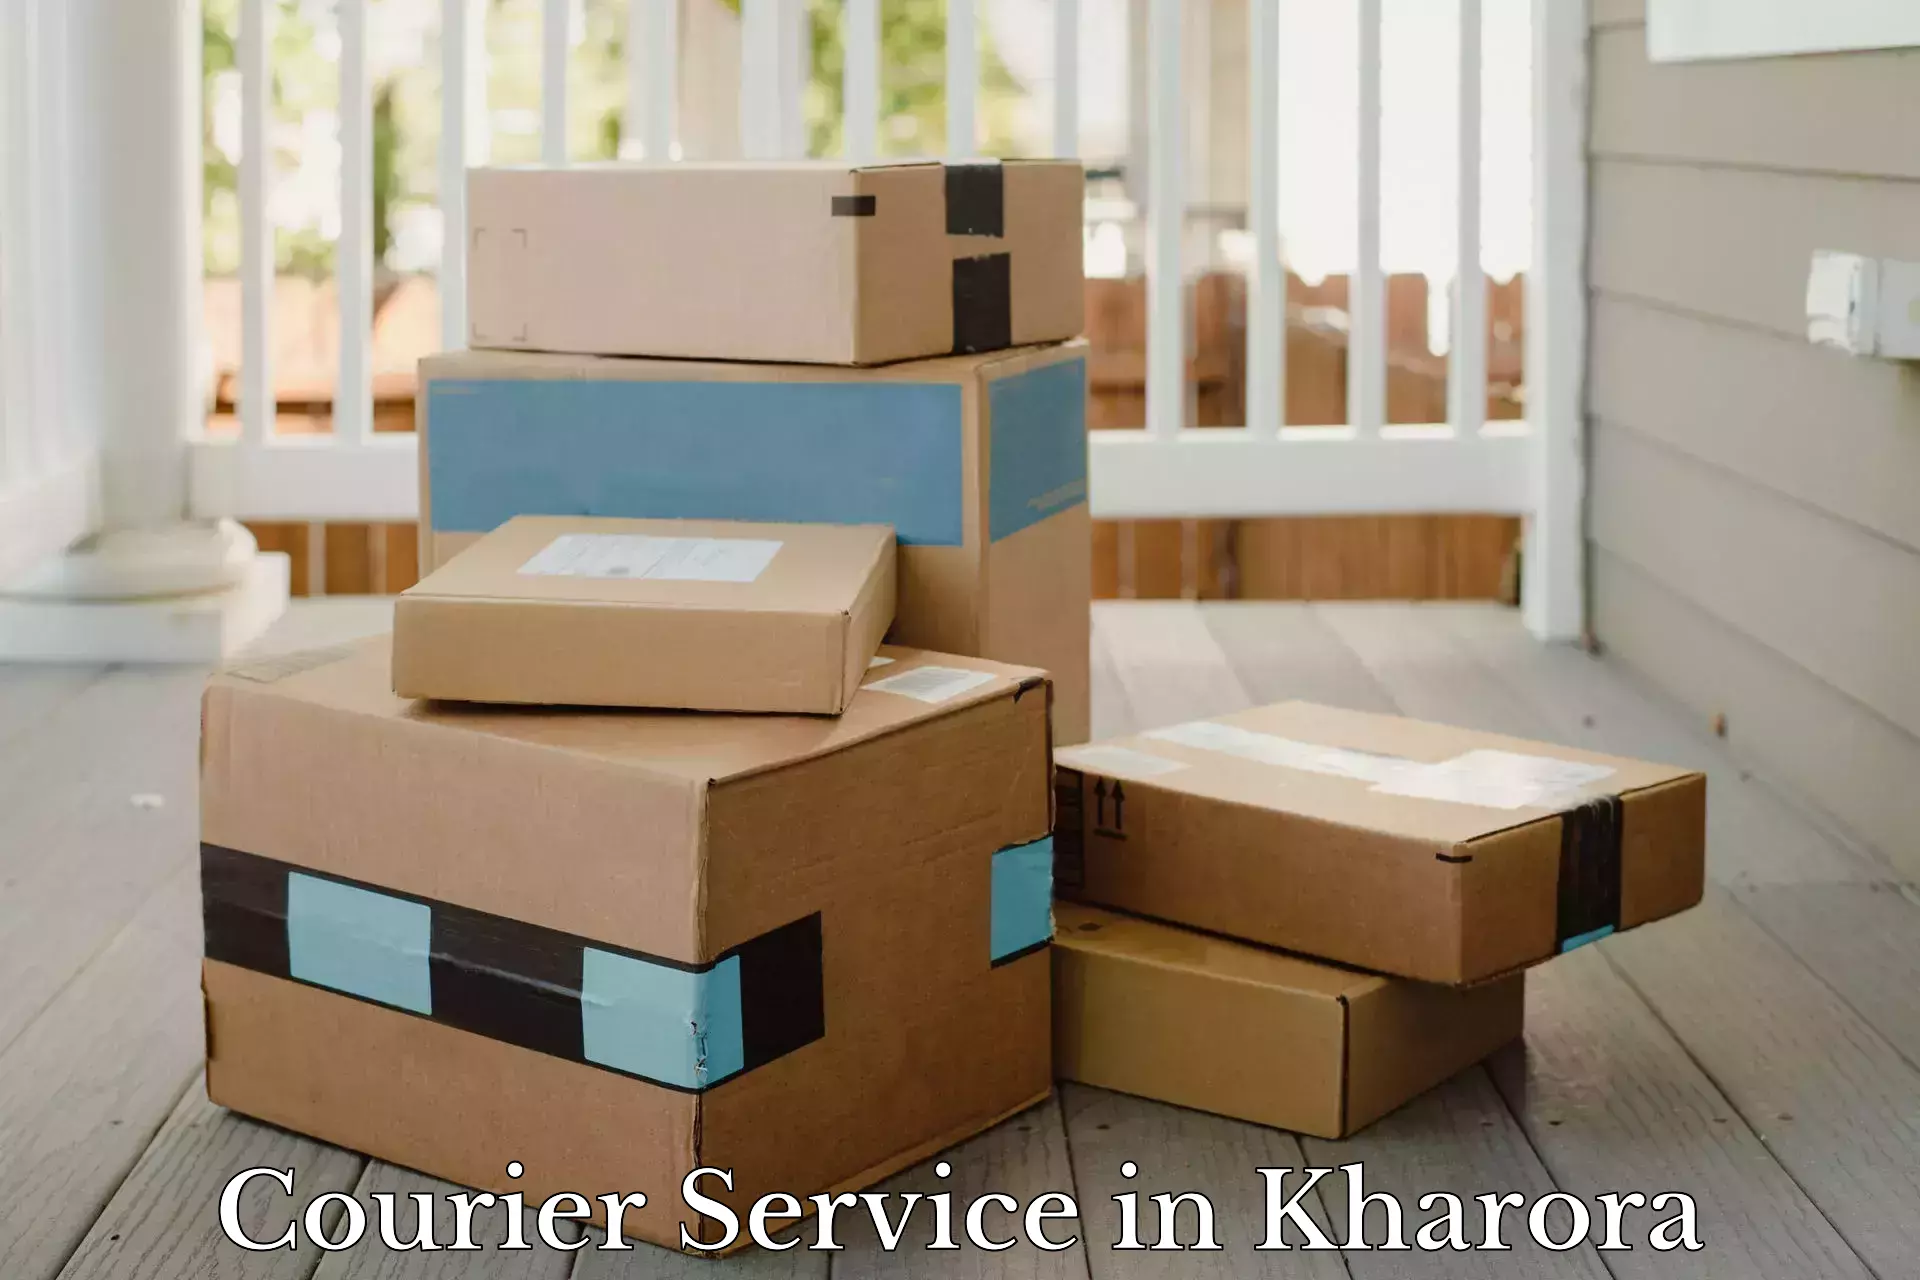 Competitive shipping rates in Kharora